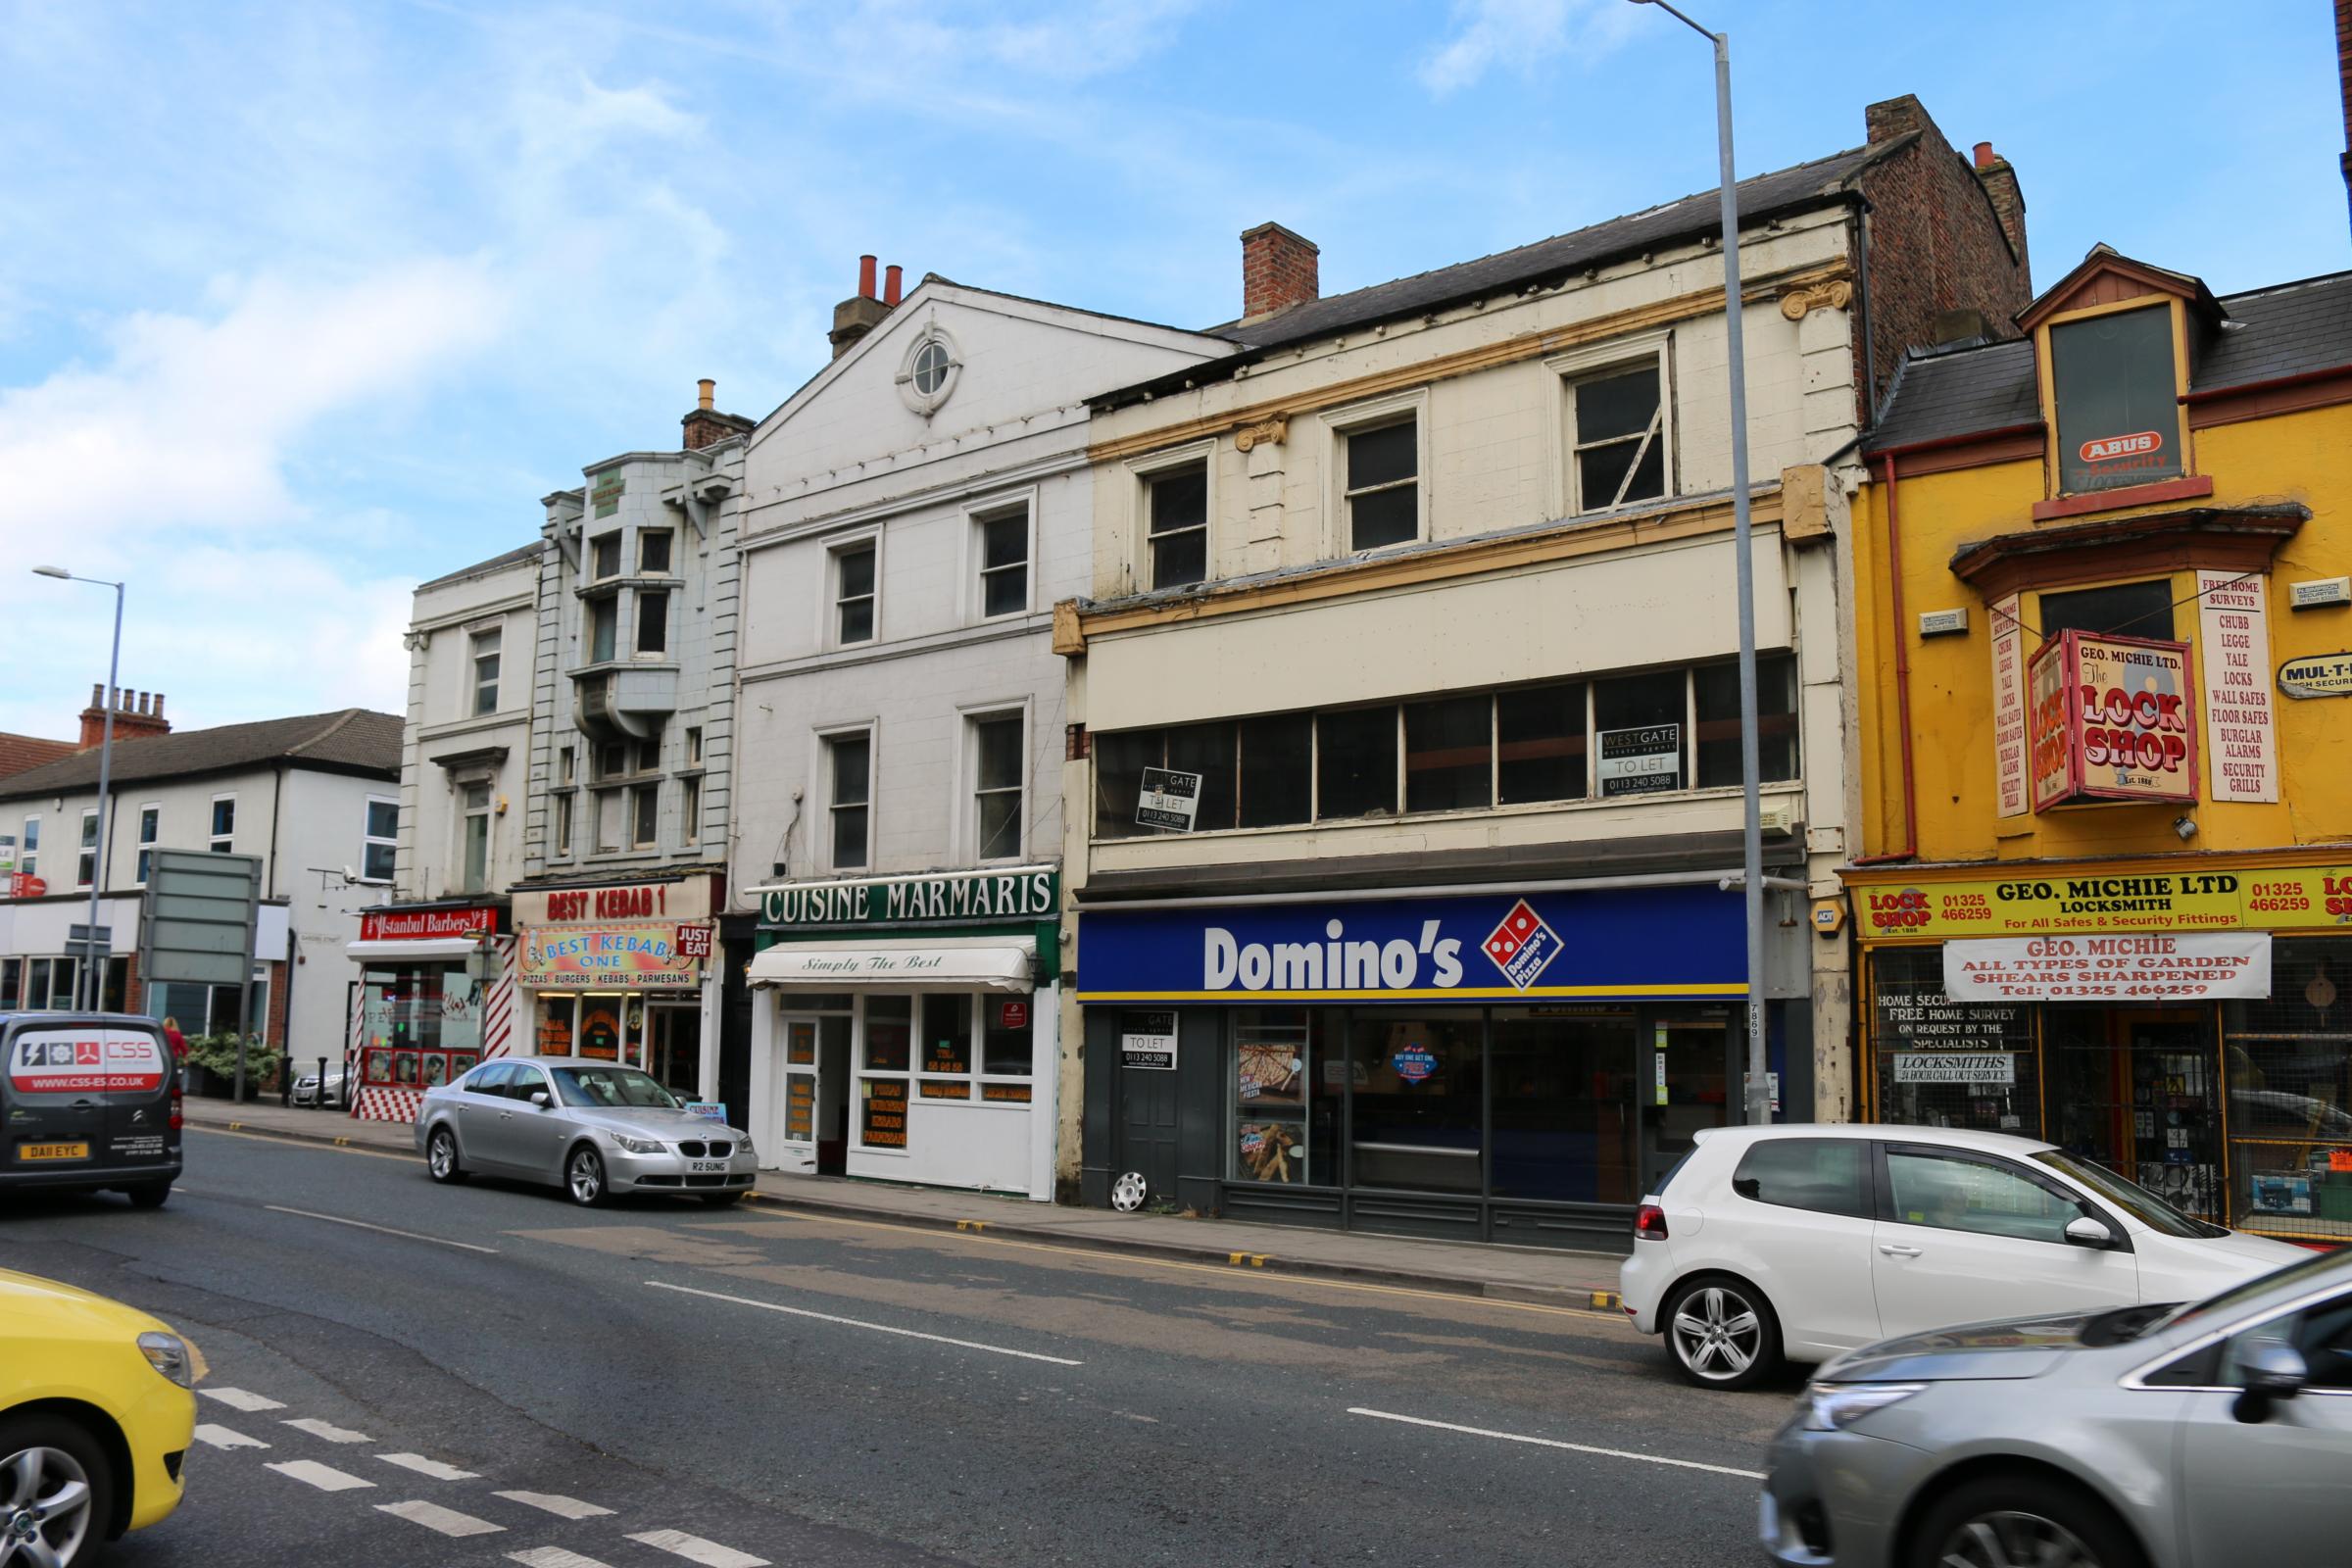 Edward Peases house in Northgate, Darlington, is where the kebab shops are today although he also owned the pizza parlour